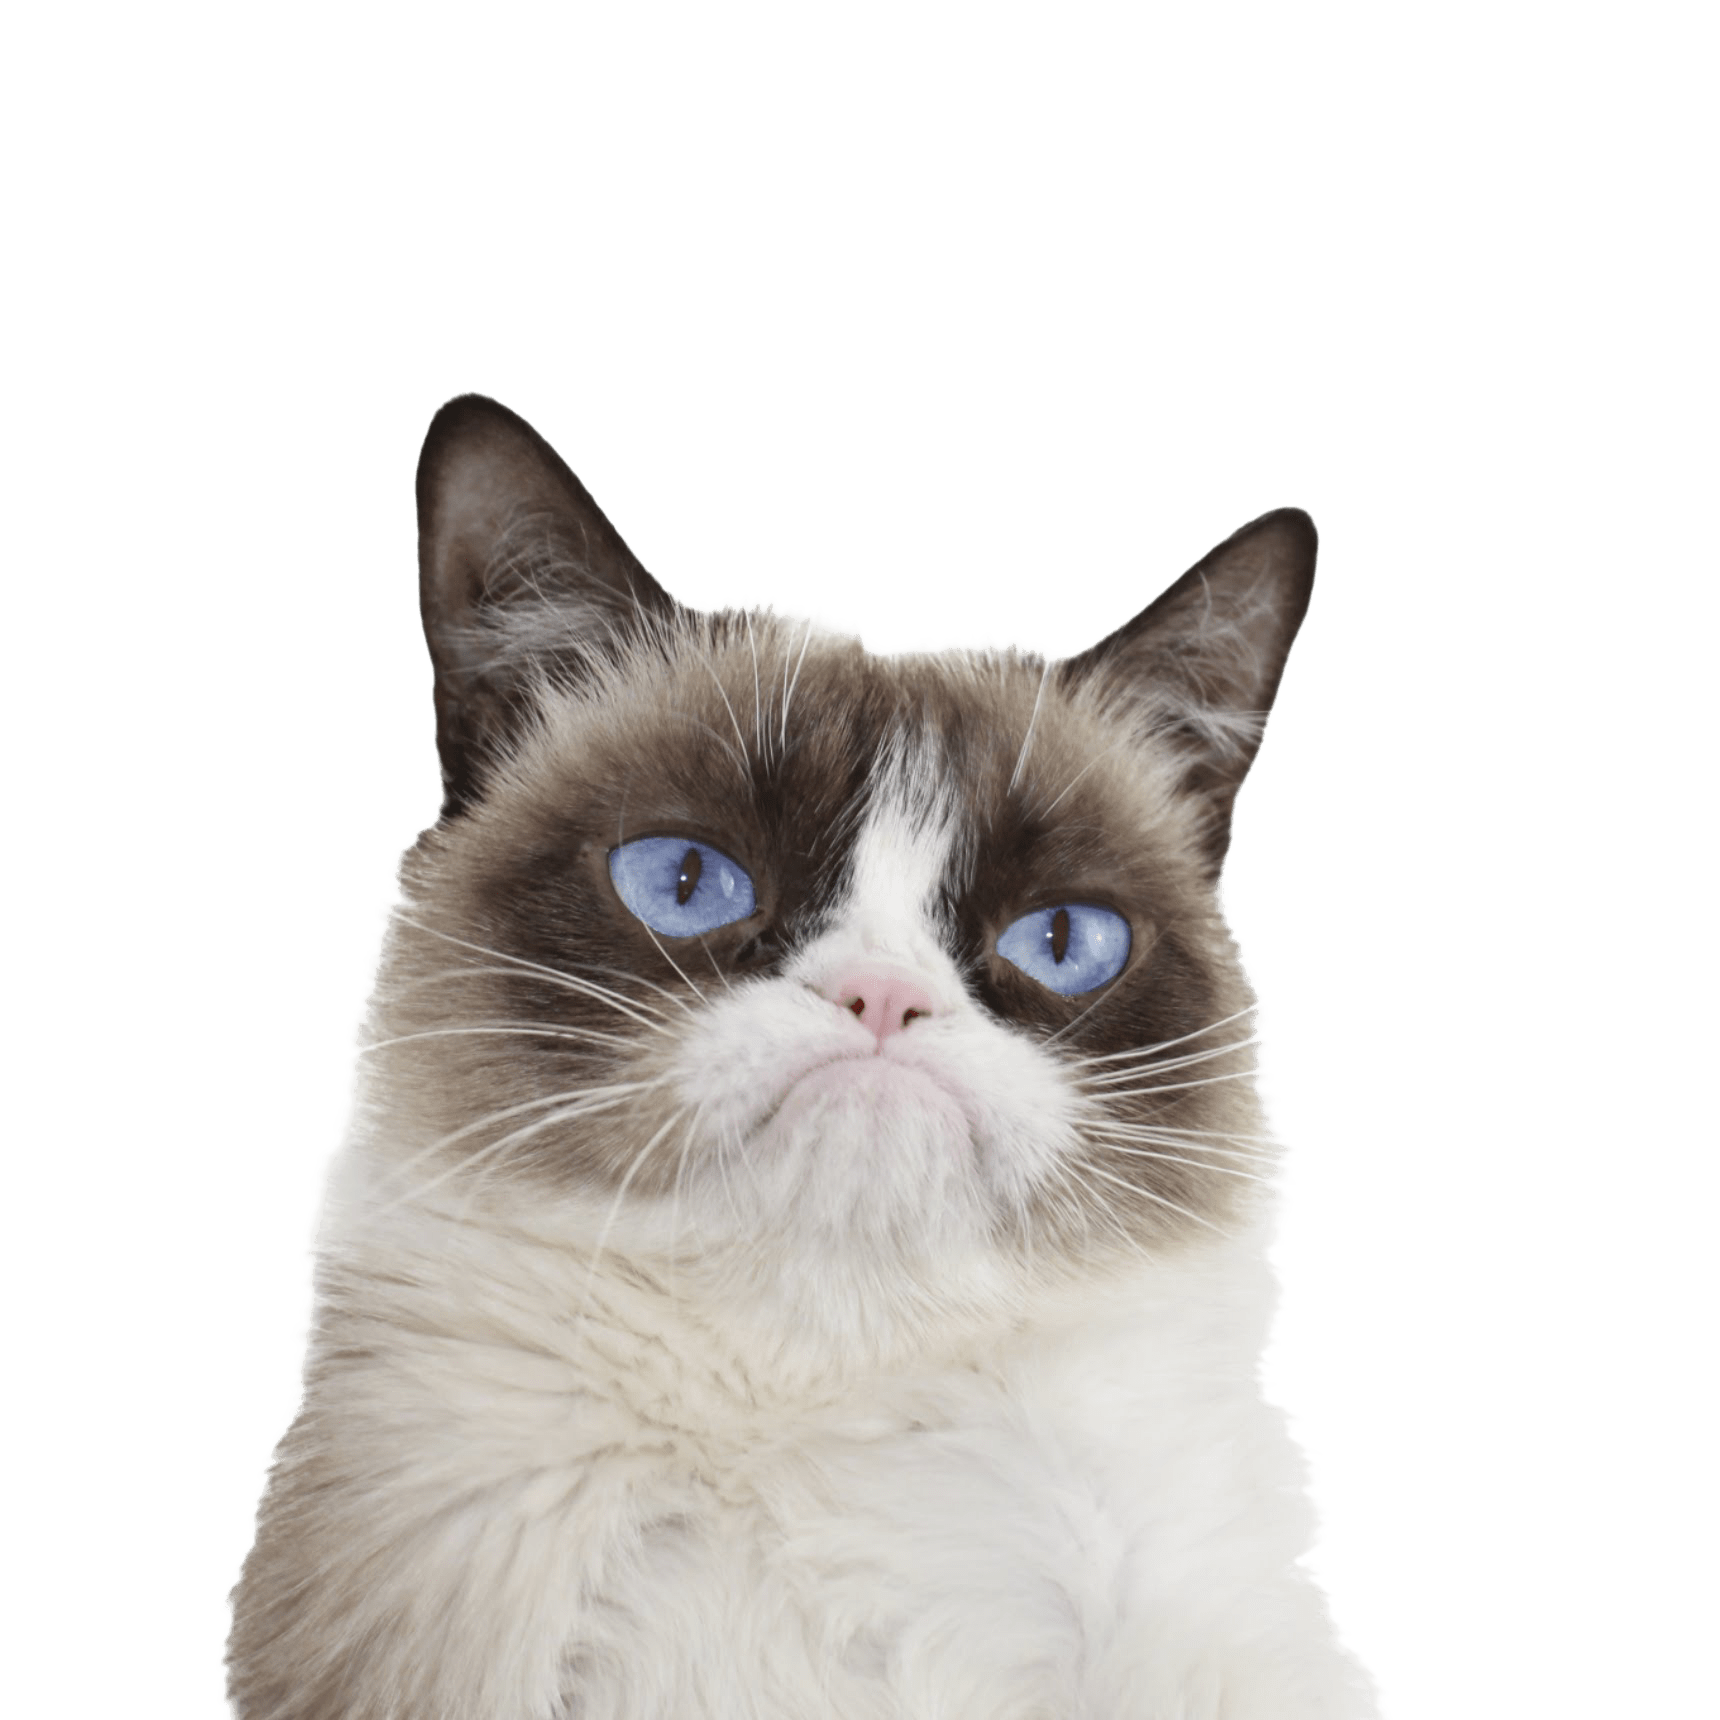 Cat Face PNG Background Image